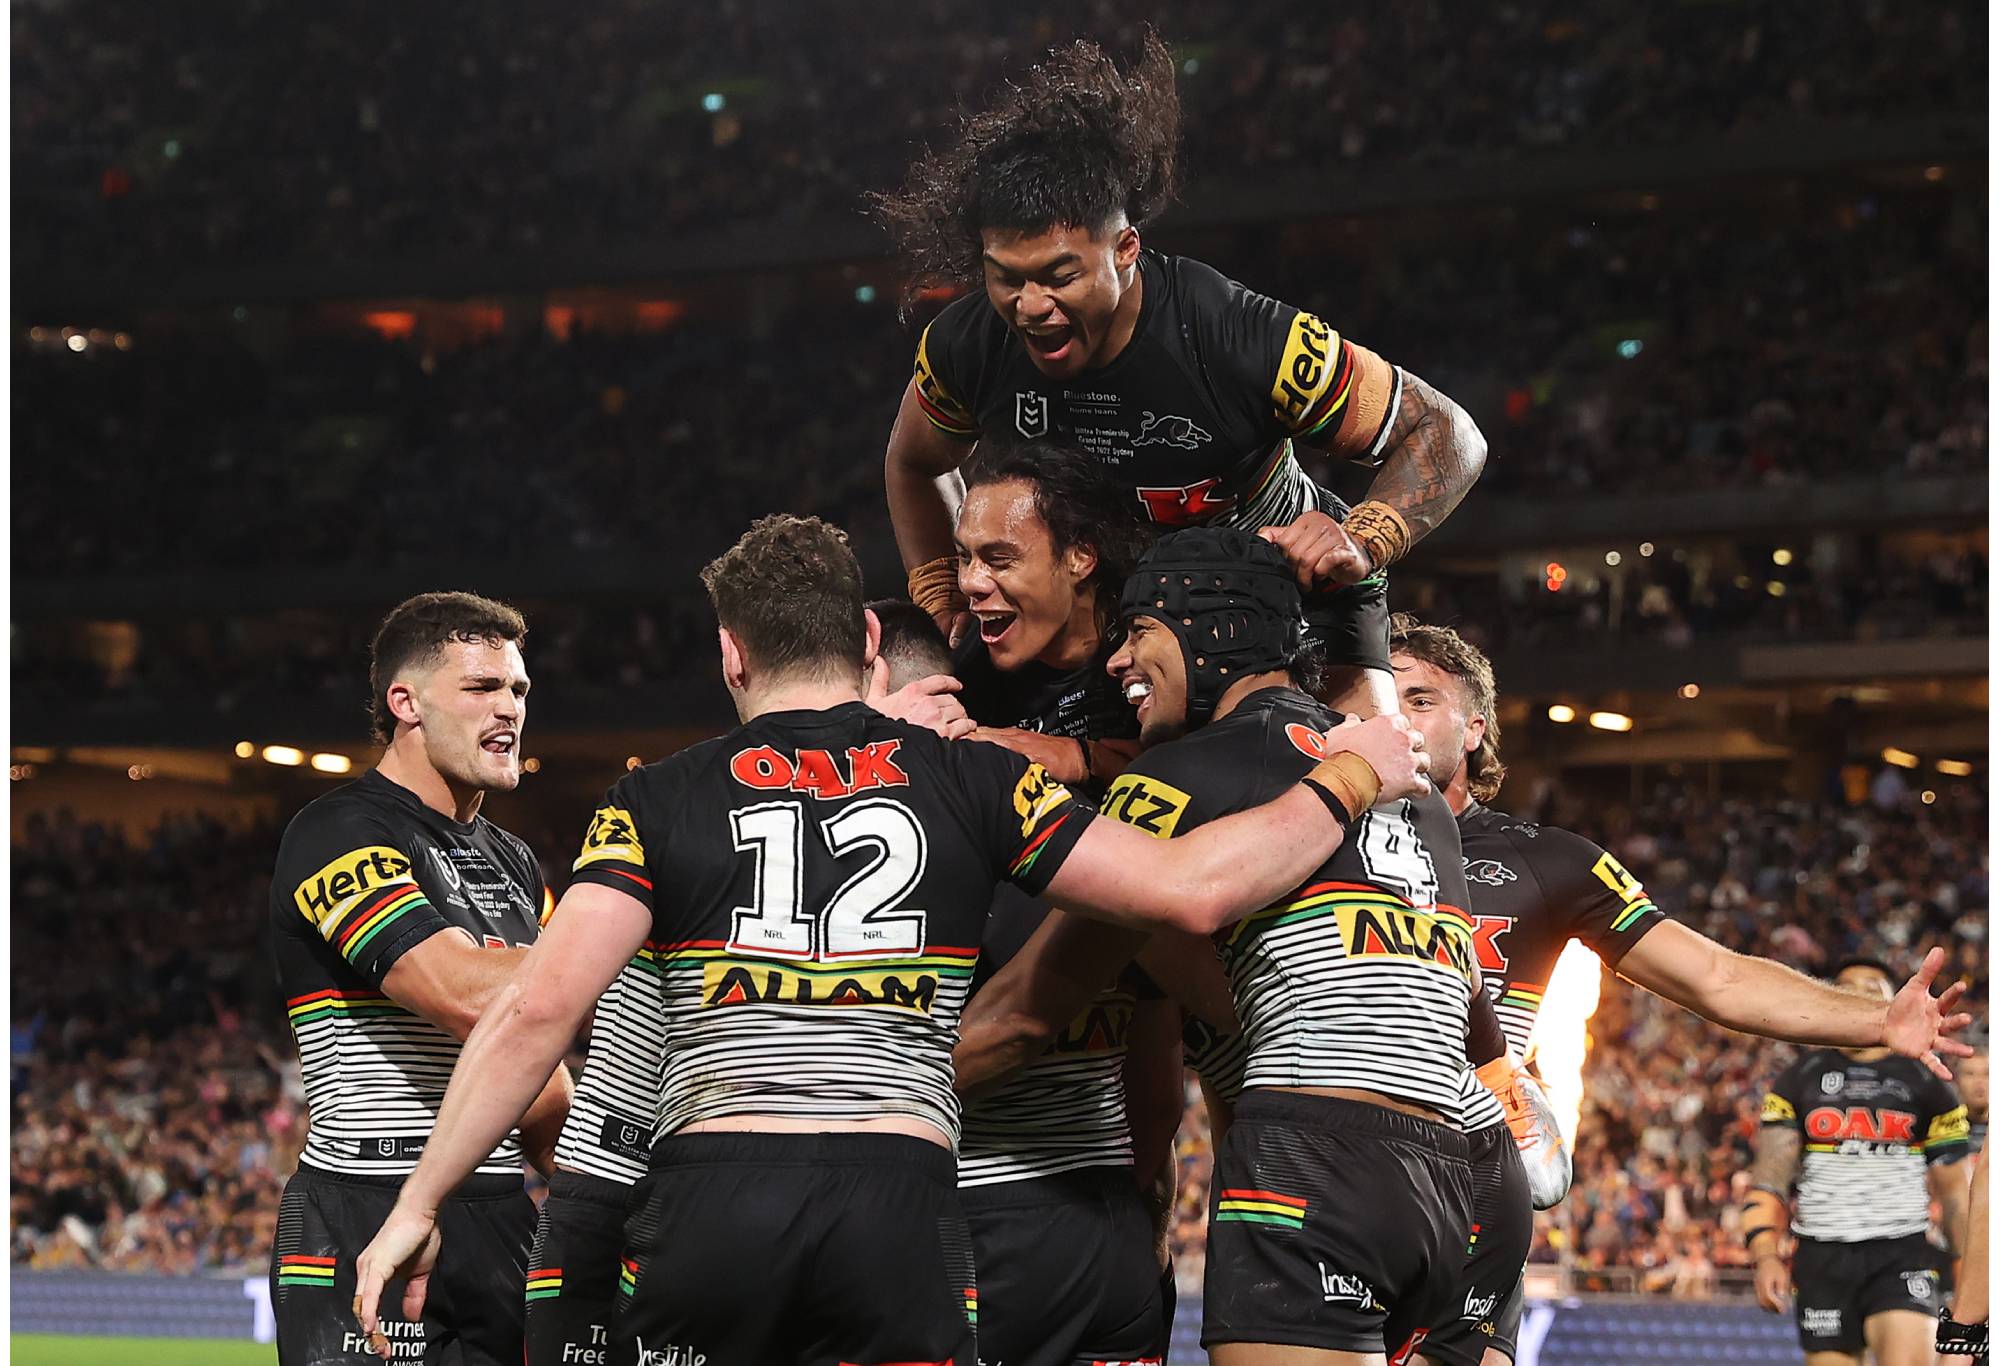 SYDNEY, AUSTRALIA - OCTOBER 02: Charlie Staines of the Panthers celebrates with team mates after scoring a try during the 2022 NRL Grand Final match between the Penrith Panthers and the Parramatta Eels at Accor Stadium on October 02, 2022, in Sydney, Australia. (Photo by Mark Kolbe/Getty Images)